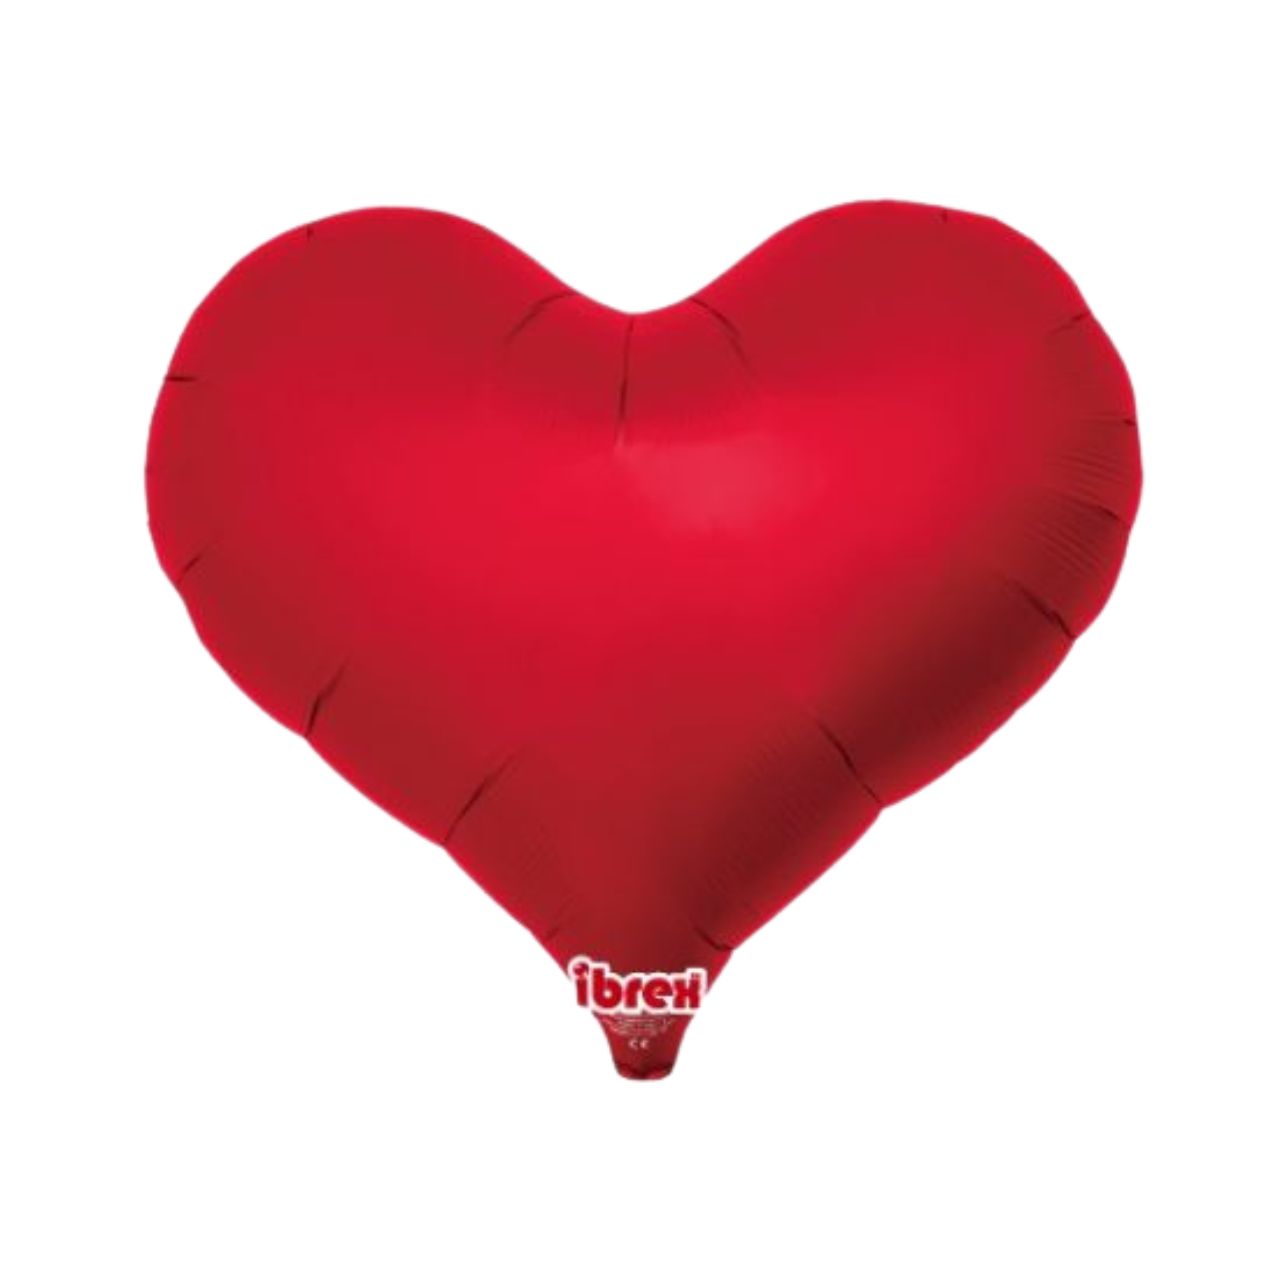 Ibreh Metallic Ruby Red Jelly Heart Foil Balloon (unpackaged)